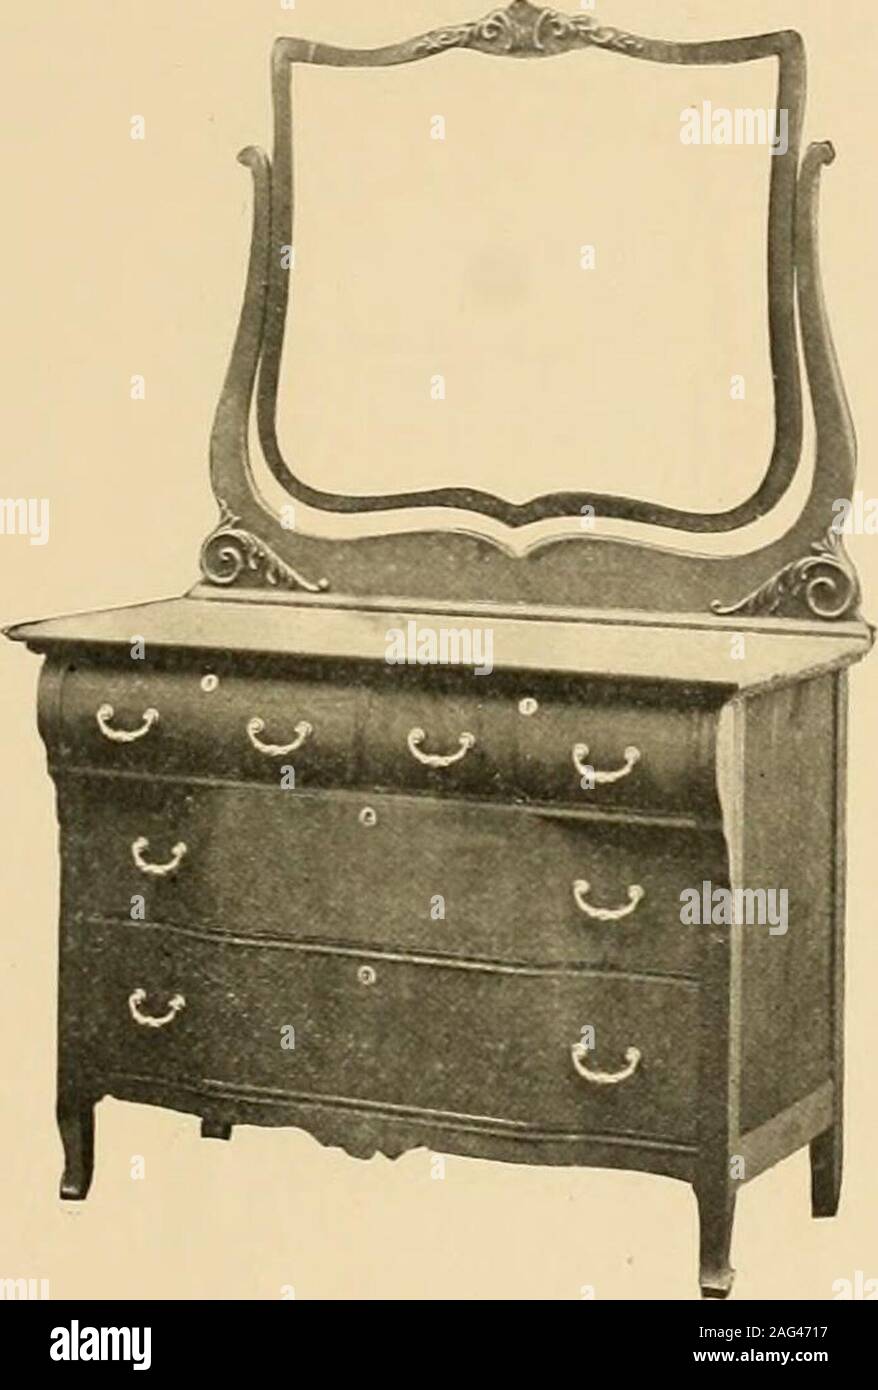 . Illustrated catalogue.. No. 244- Dresser Bircli (ll.iss Finish Top Draper S^ell Top 42 X 22 in. Glass 24 X 30 in, French Bevel. No. 245 Dresser Hinli KuIjIj.-.! and Polished Top Drawers Round Two Bottom Drawers Swell Top 46 X 22 in. Gla,ss 28 X 34 in. French Bevel Stock Photo